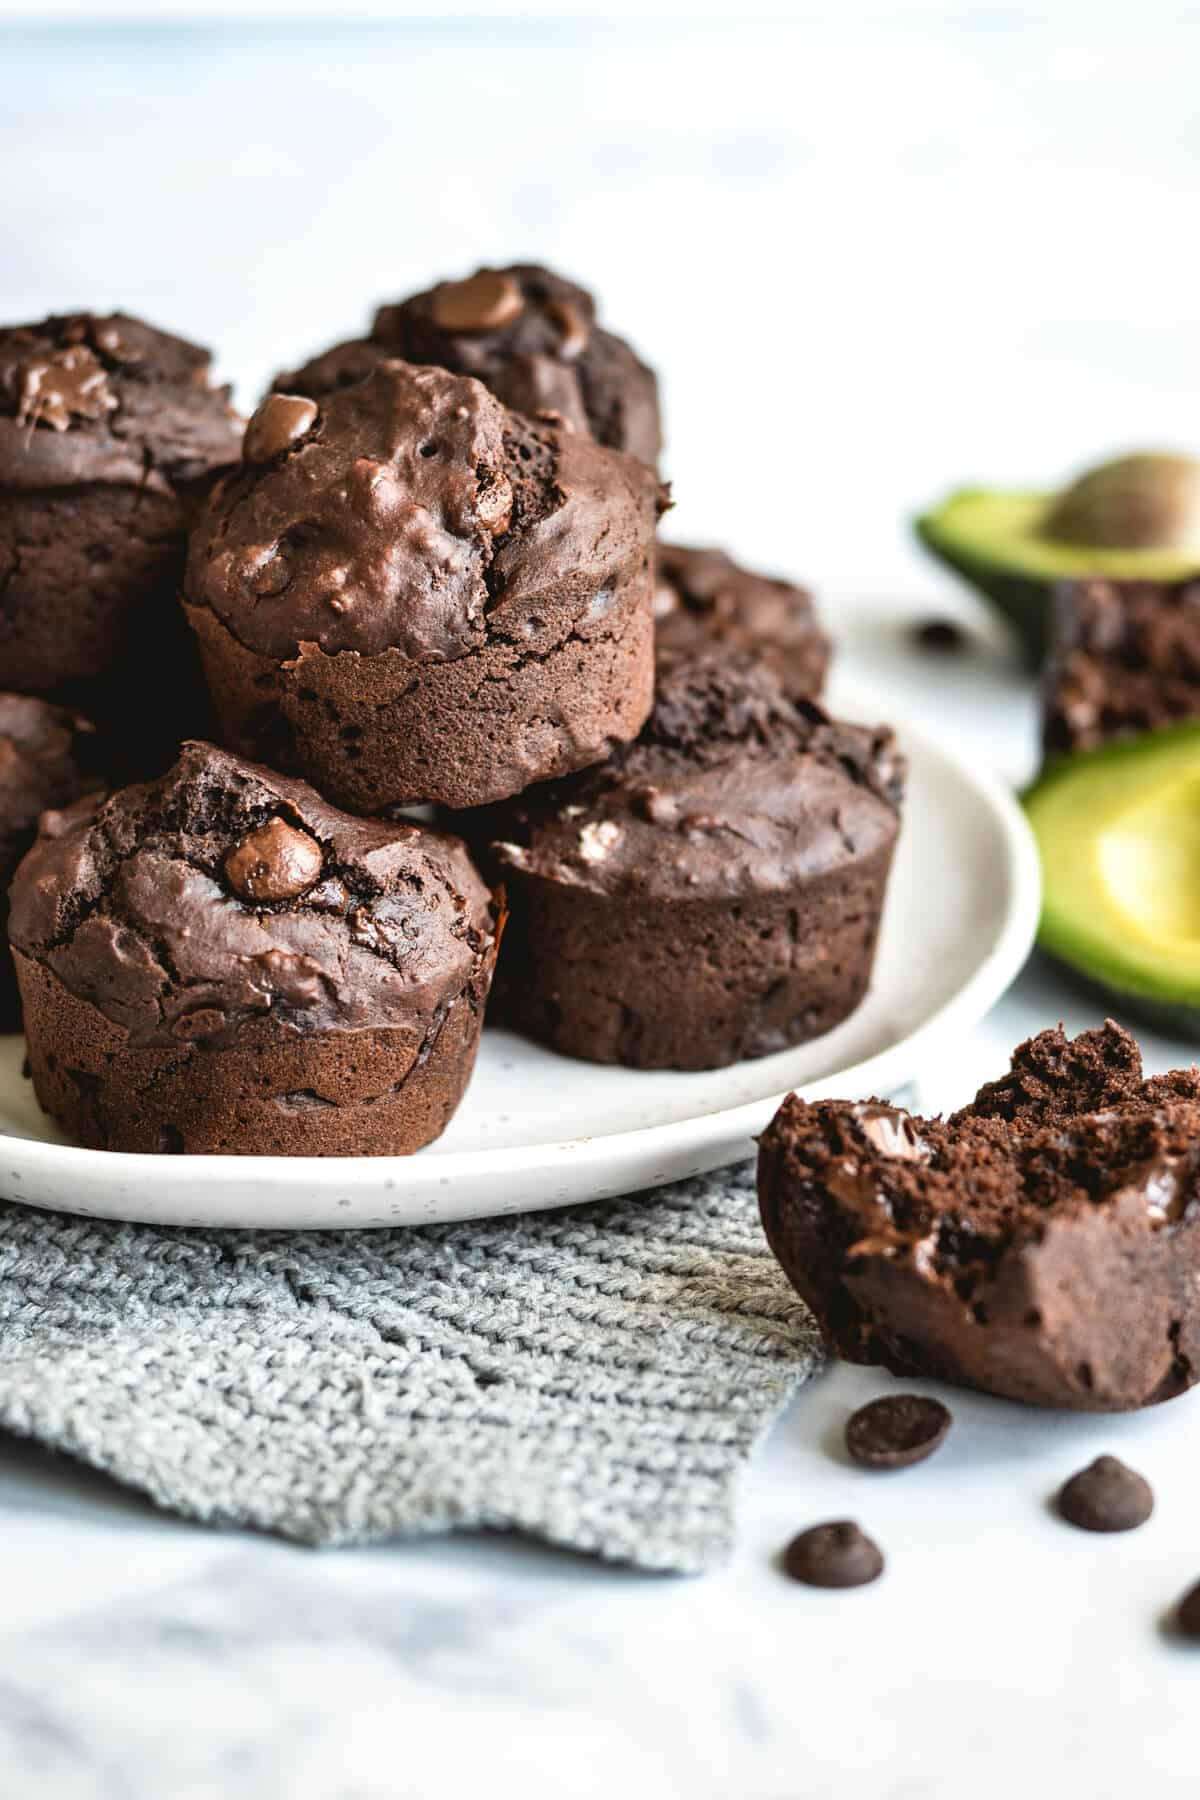 finished muffins on a white plate with avocados and chocolate chips on a white bench